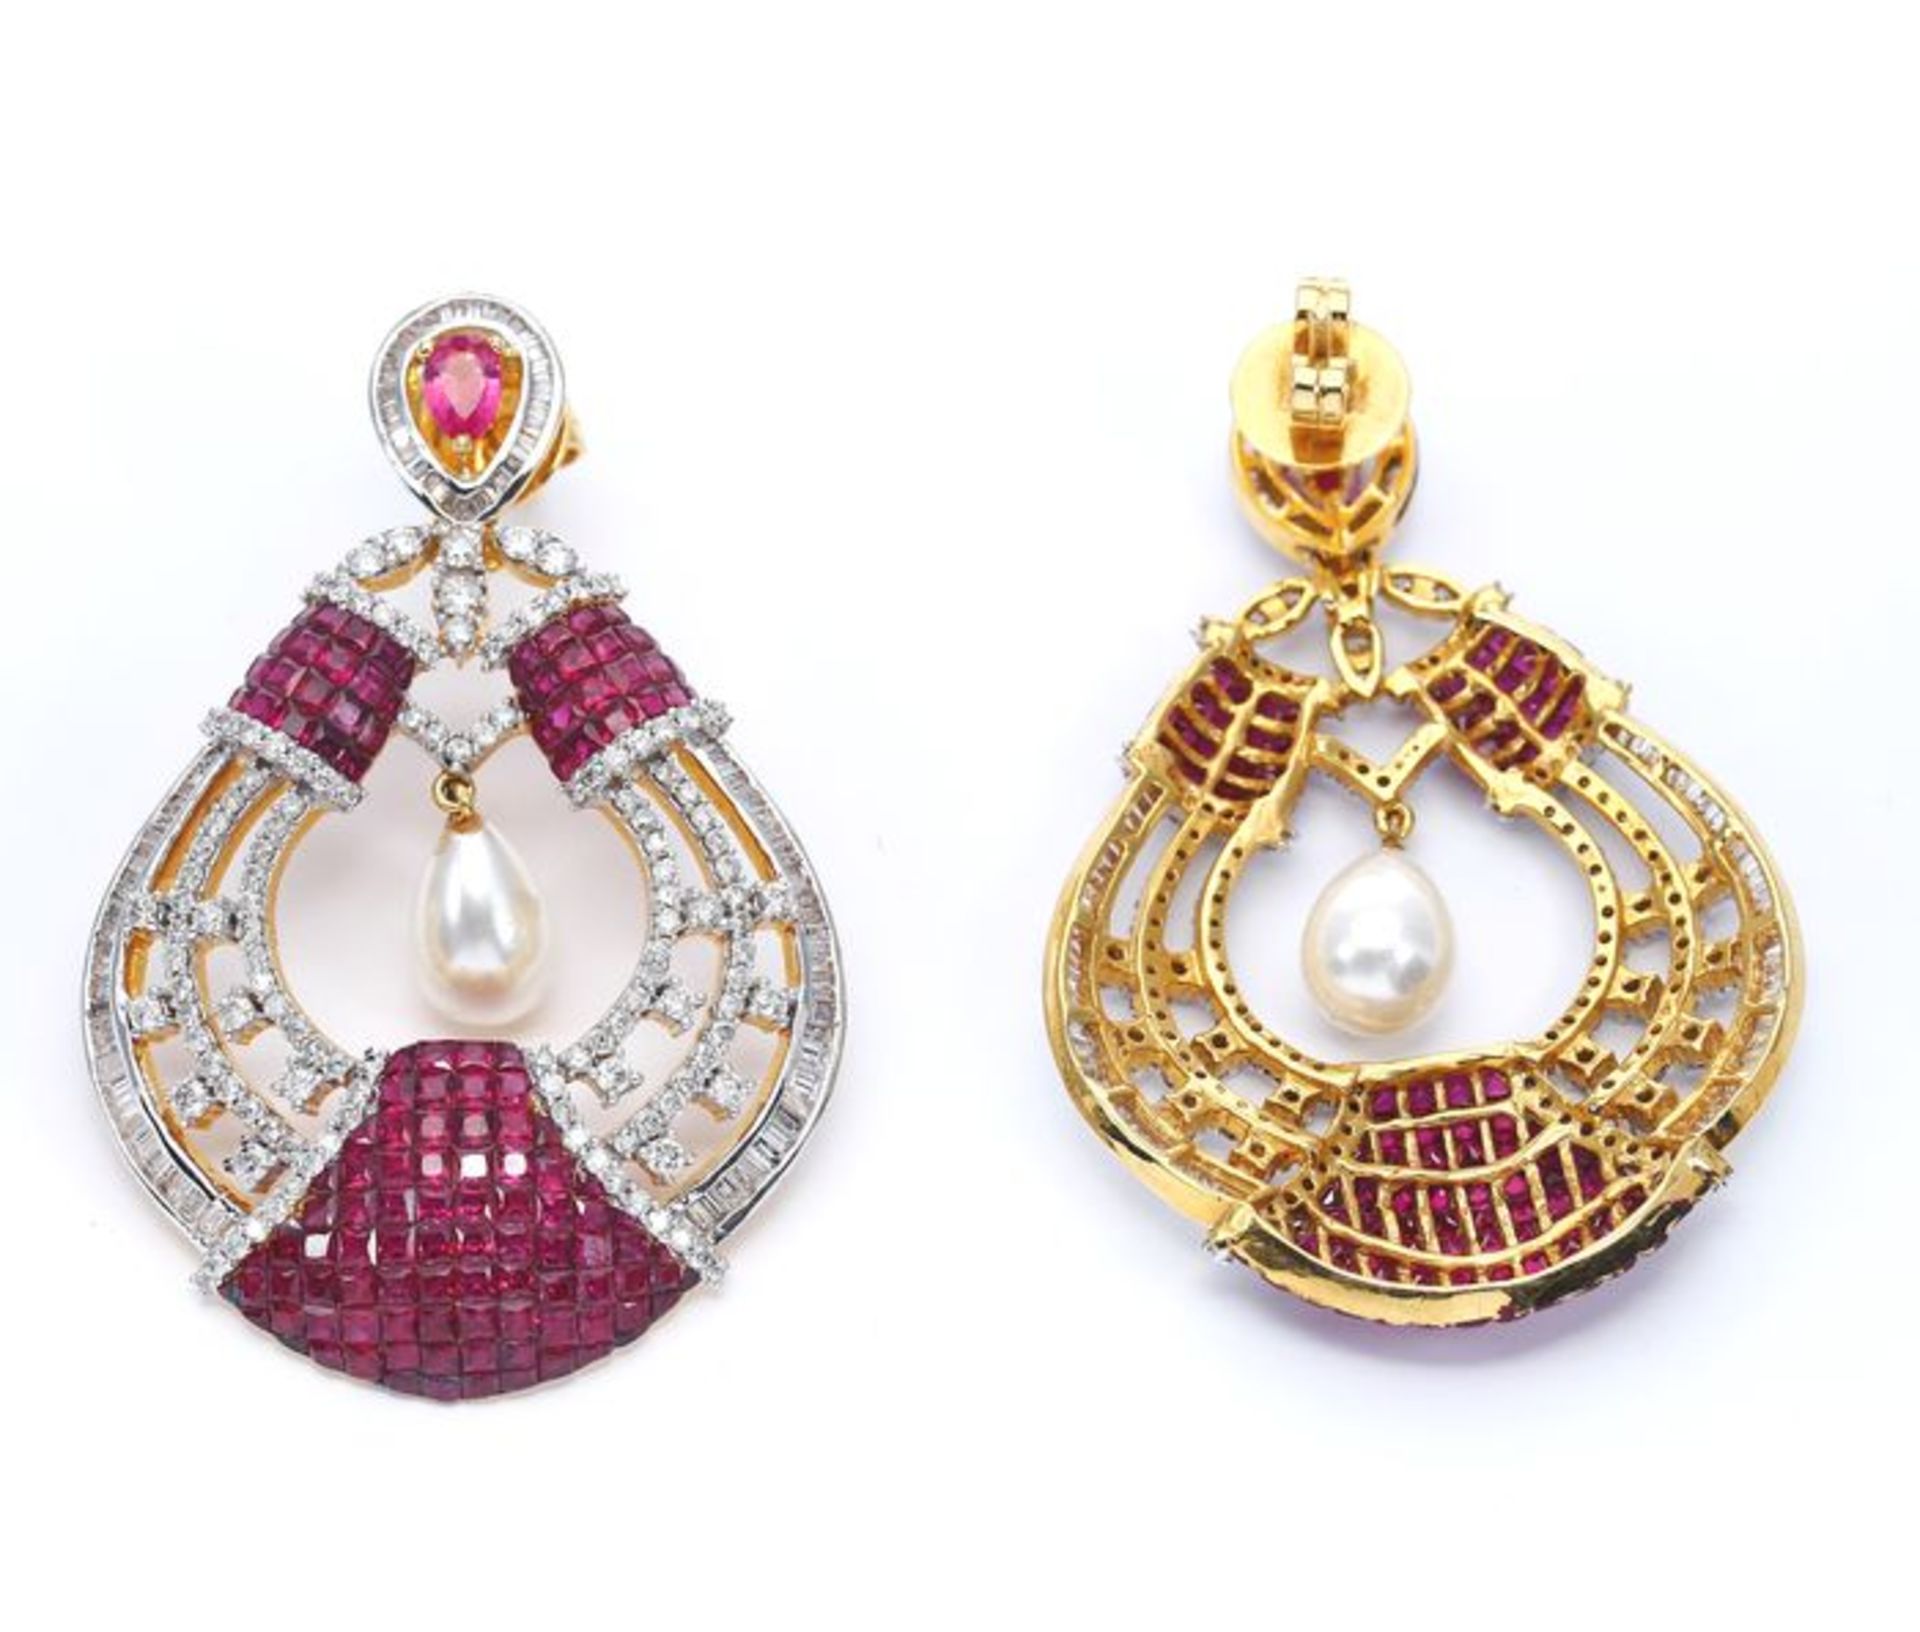 IGI Certified 14 K Yellow Gold Diamond, Ruby & Pearl Necklace Pendant Set with Chandelier Earrings - Image 5 of 9